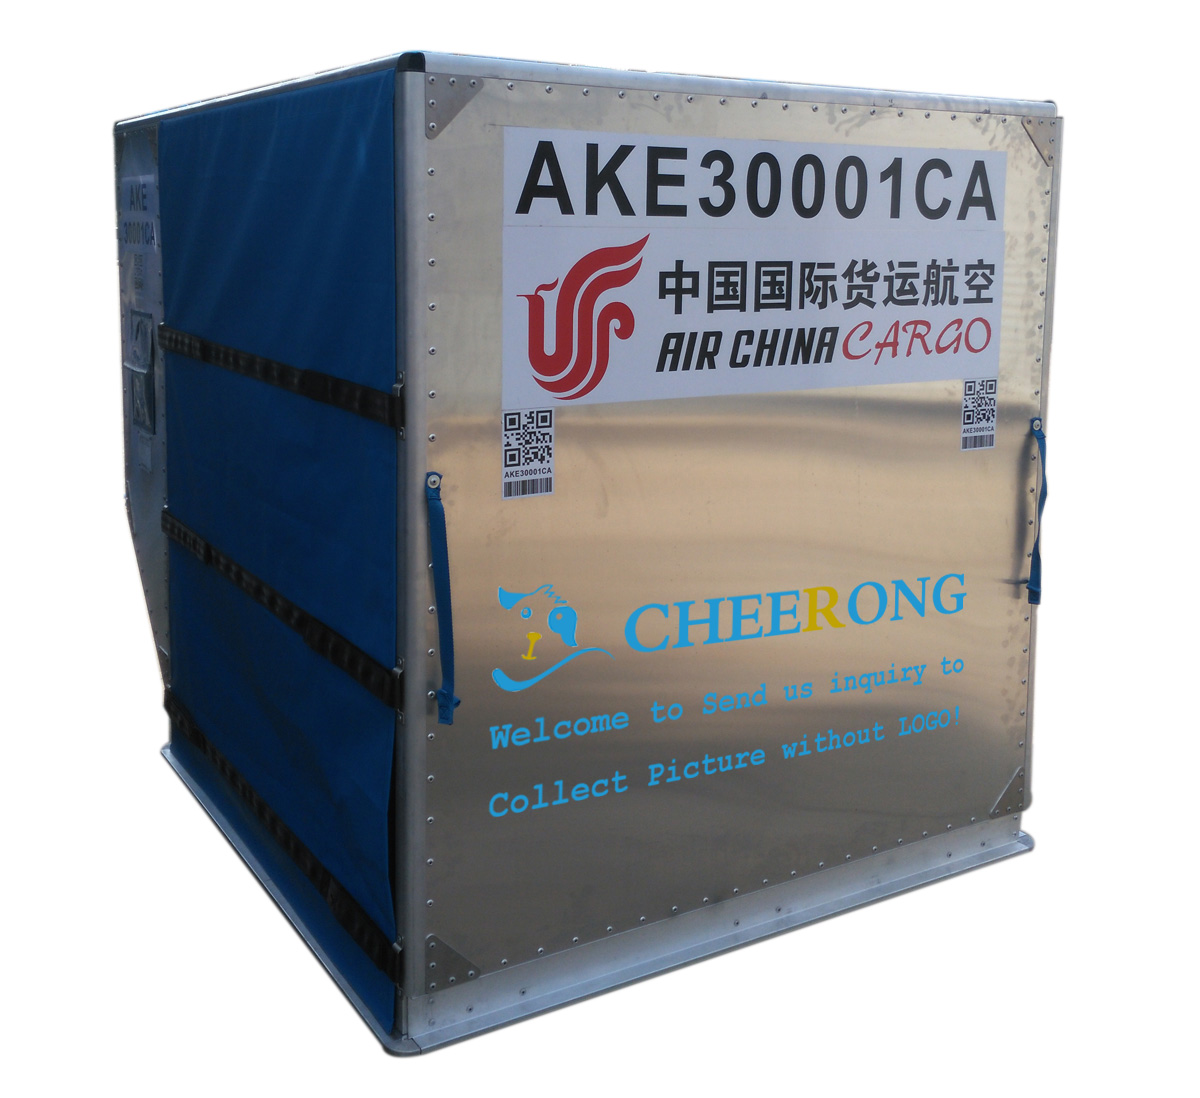 Cheerong LD3 container from China for airdrome-3